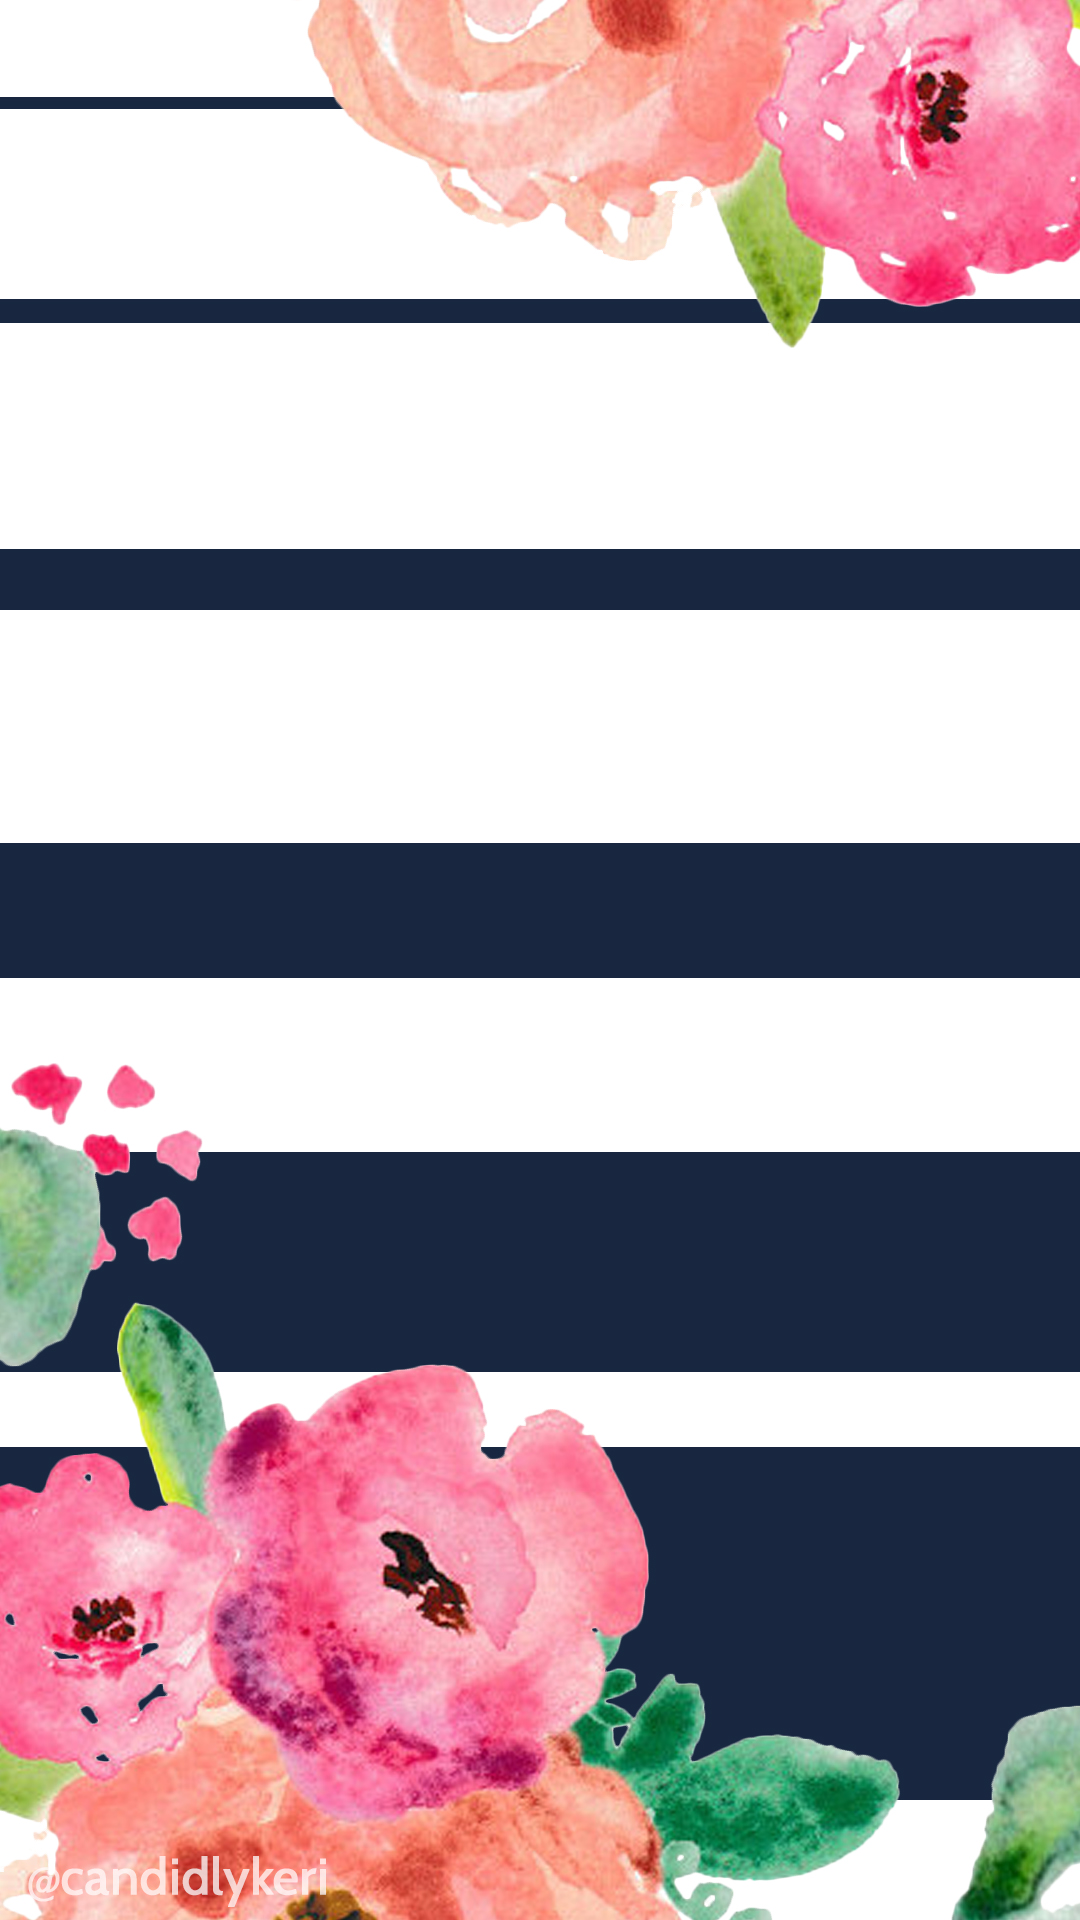 Flower And Navy Stripe Cute You Can Download For Free Iphone Cute Girly Backgrounds 1080x1920 Wallpaper Teahub Io 3 years ago on october 26, 2016. iphone cute girly backgrounds